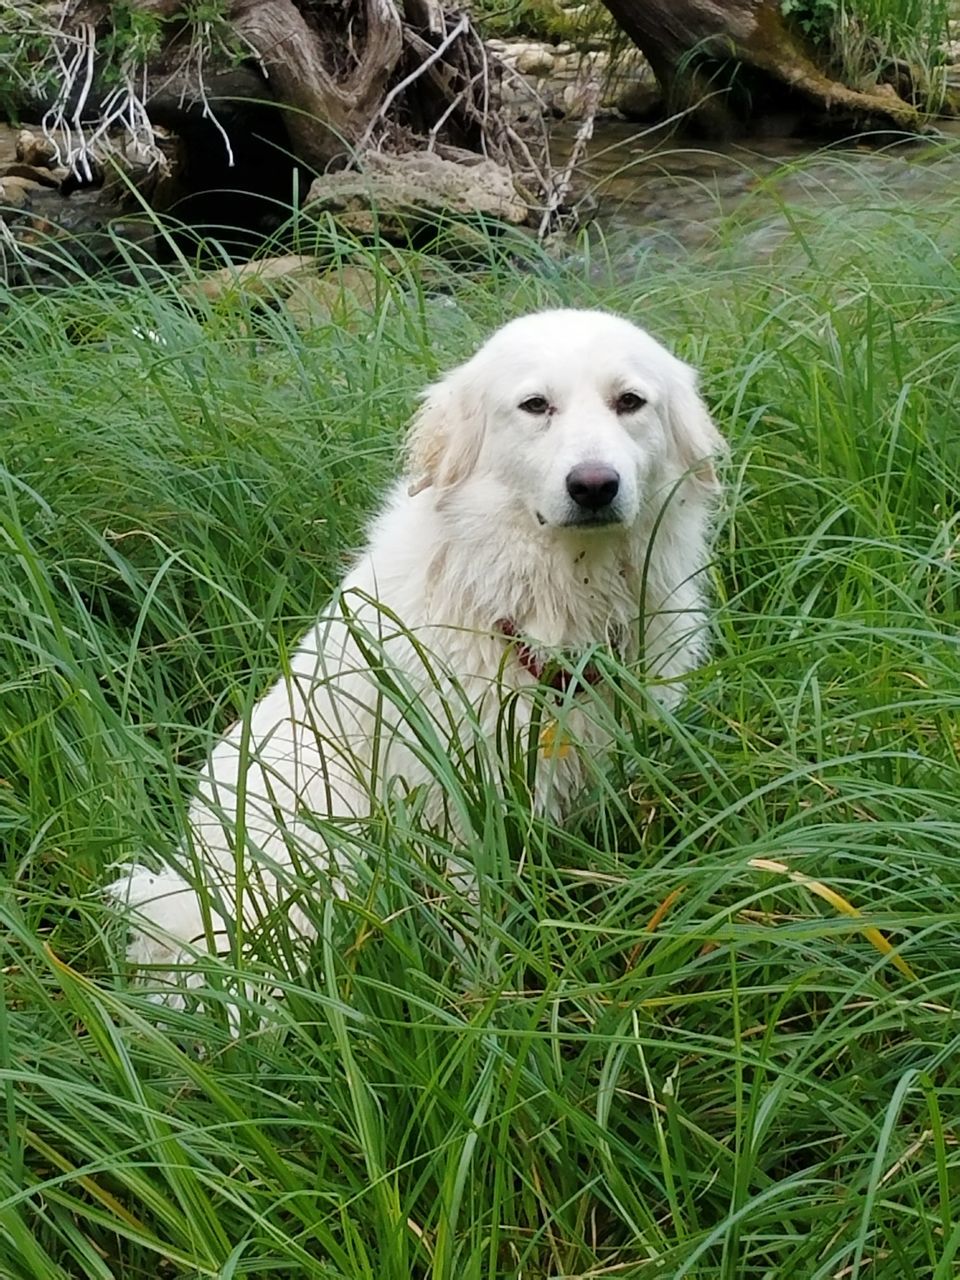 one animal, animal themes, animal, pet, mammal, grass, plant, dog, domestic animals, canine, great pyrenees, green, nature, golden retriever, no people, carnivore, day, polish tatra sheepdog, portrait, outdoors, relaxation, land, retriever, puppy, growth, looking at camera, white, field